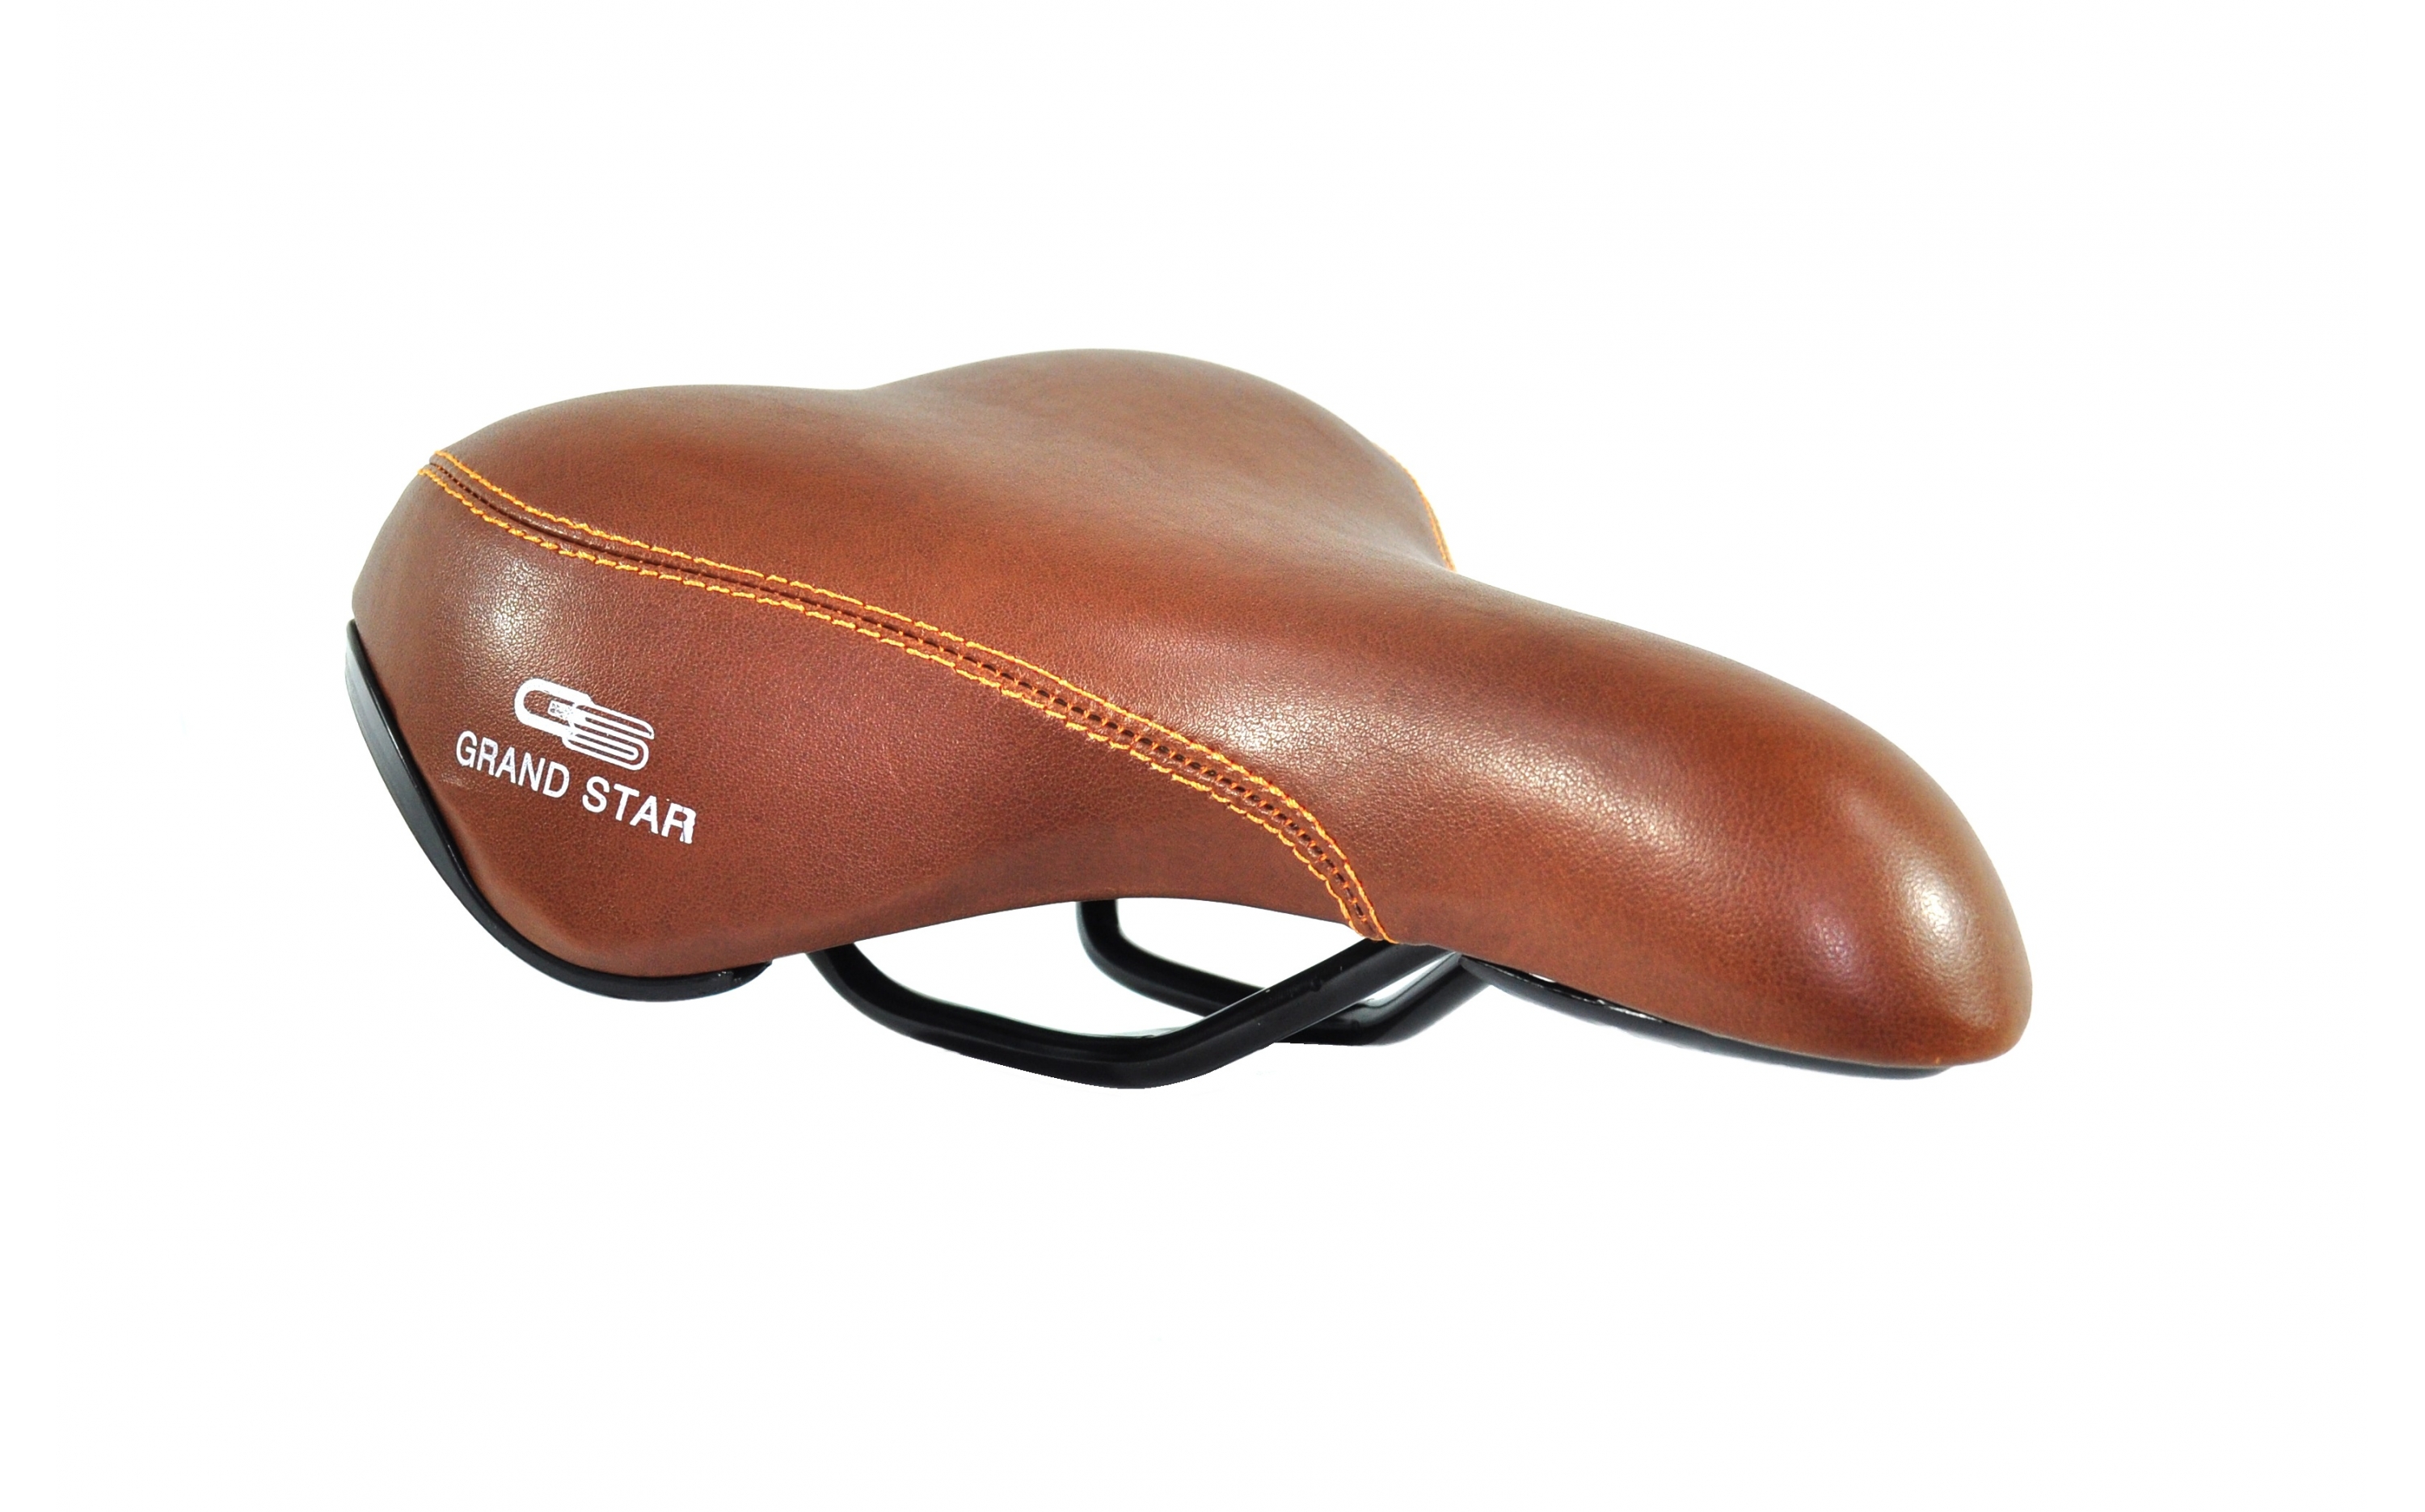  Saddle Grand Star GS-1005B1-1D 260x190mm without lock, brown